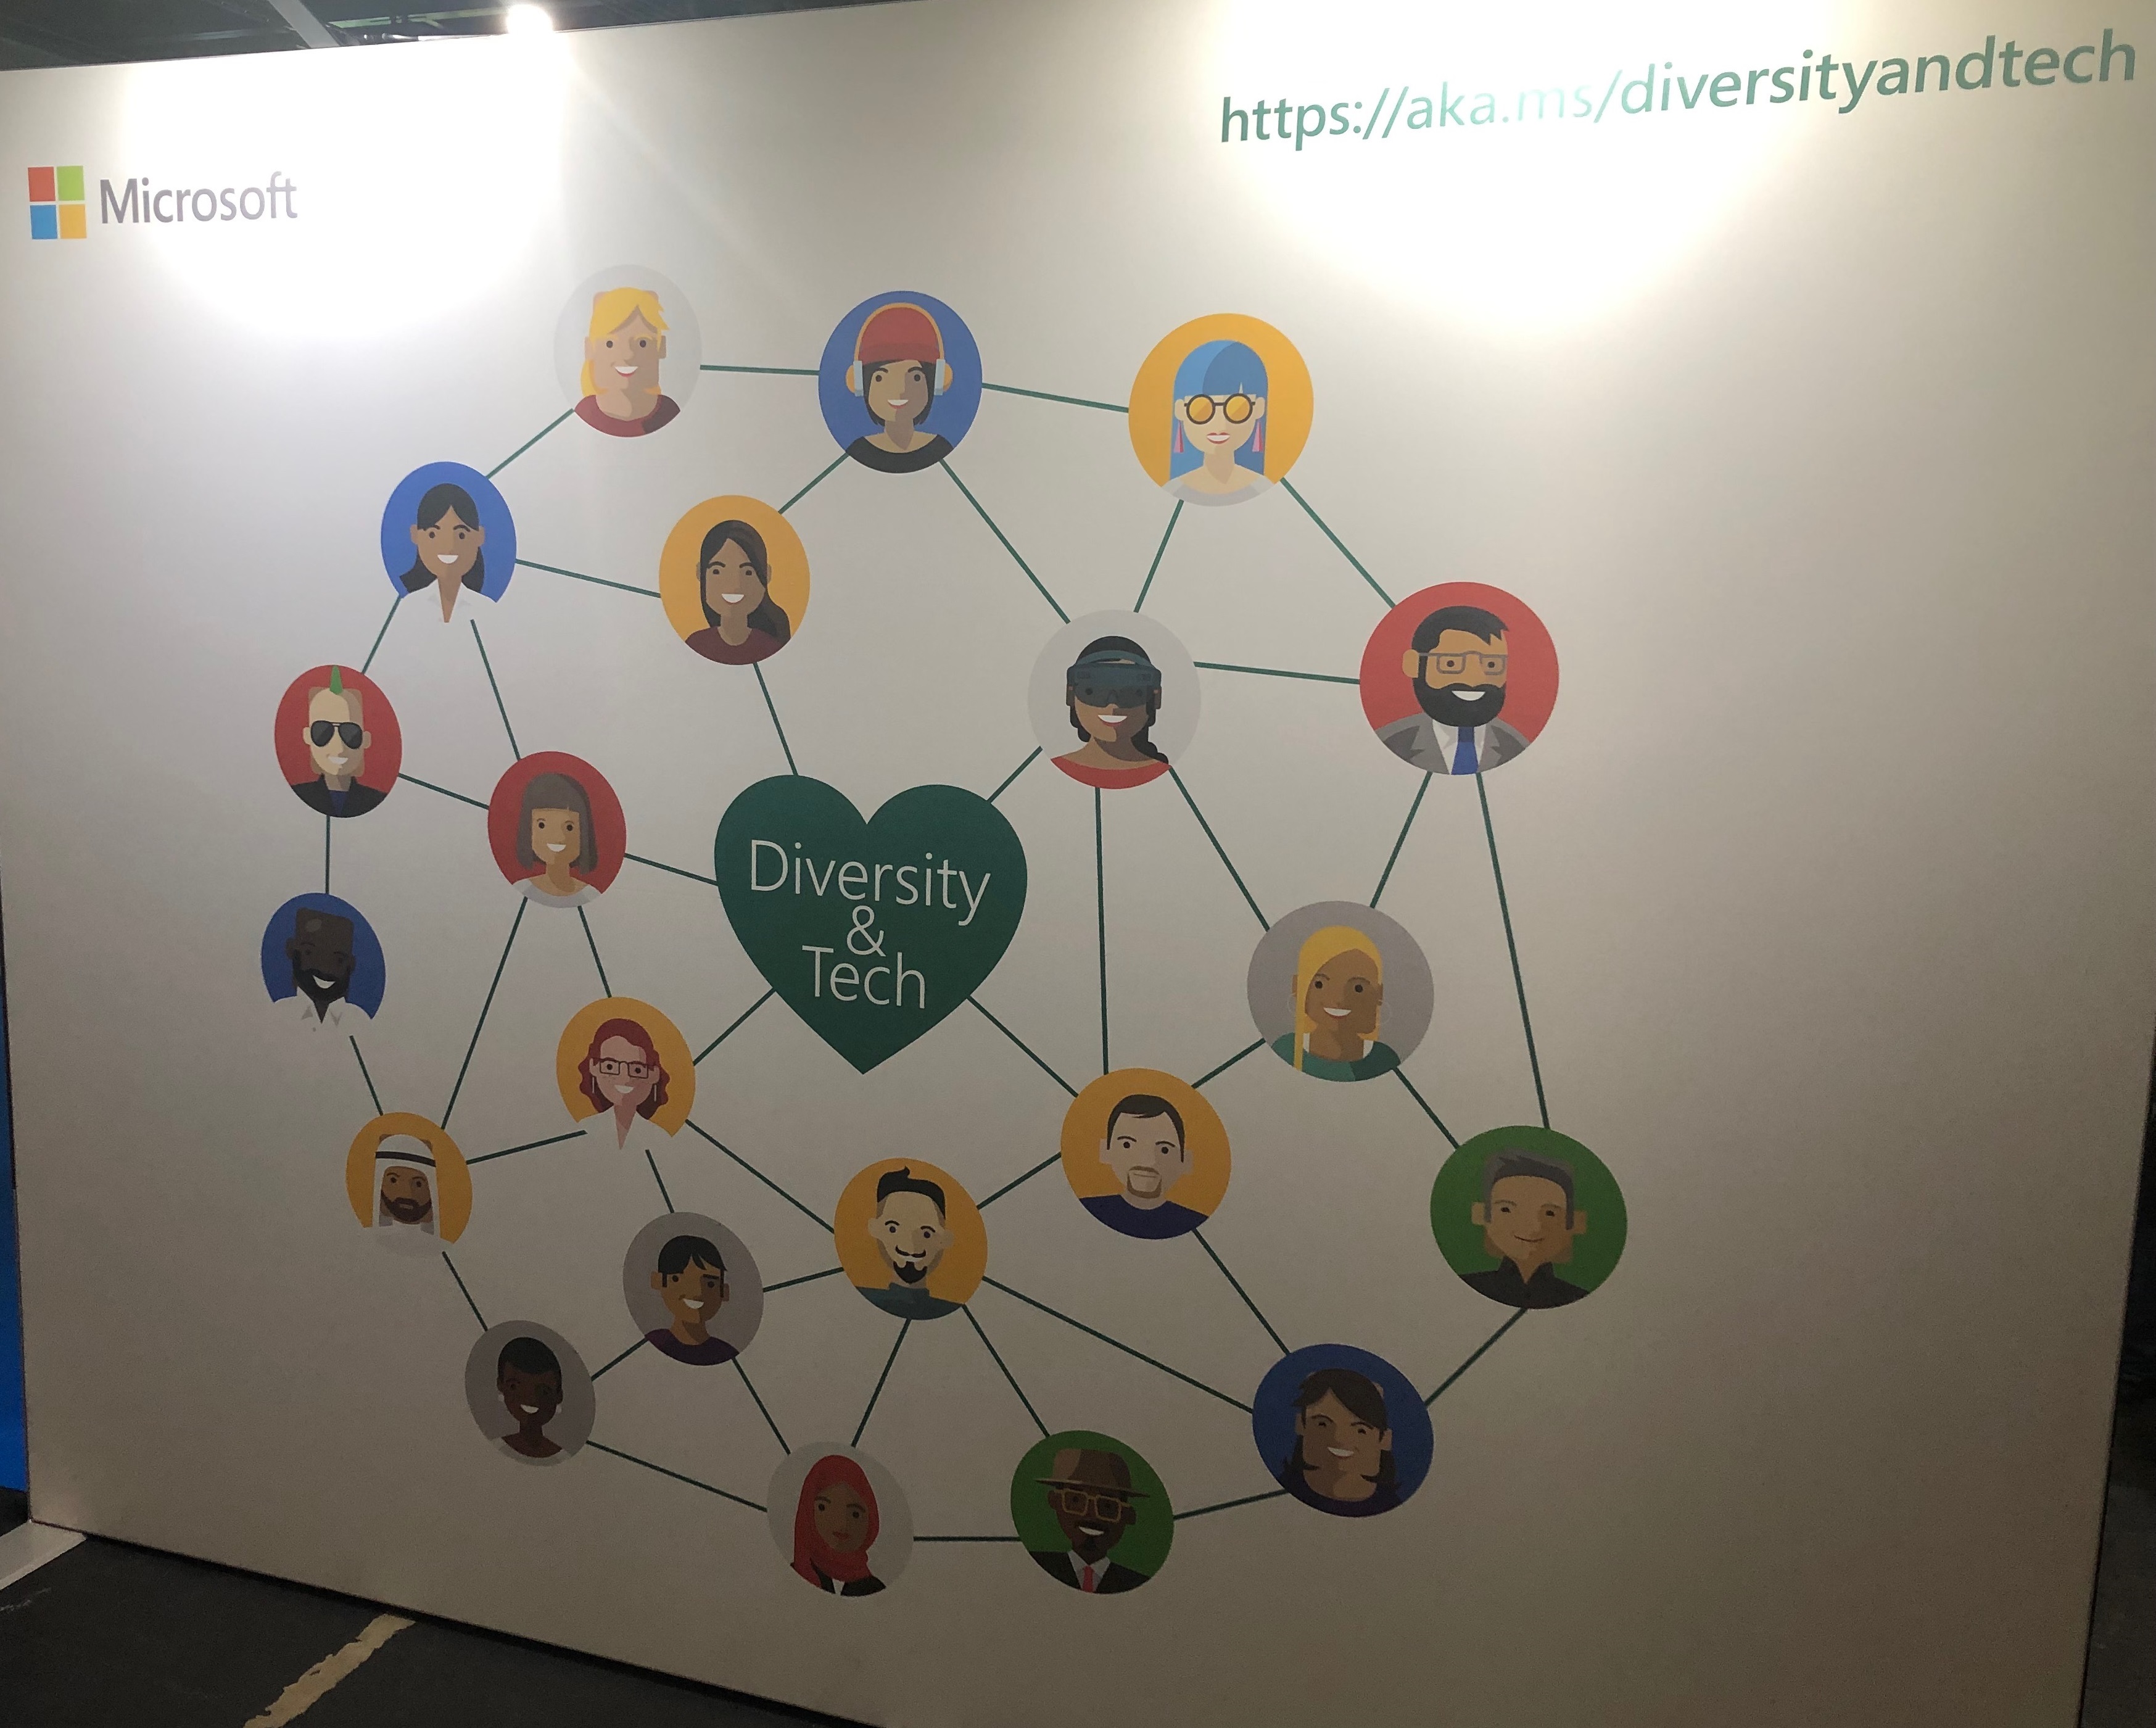 A poster recognising diversity at Microsoft